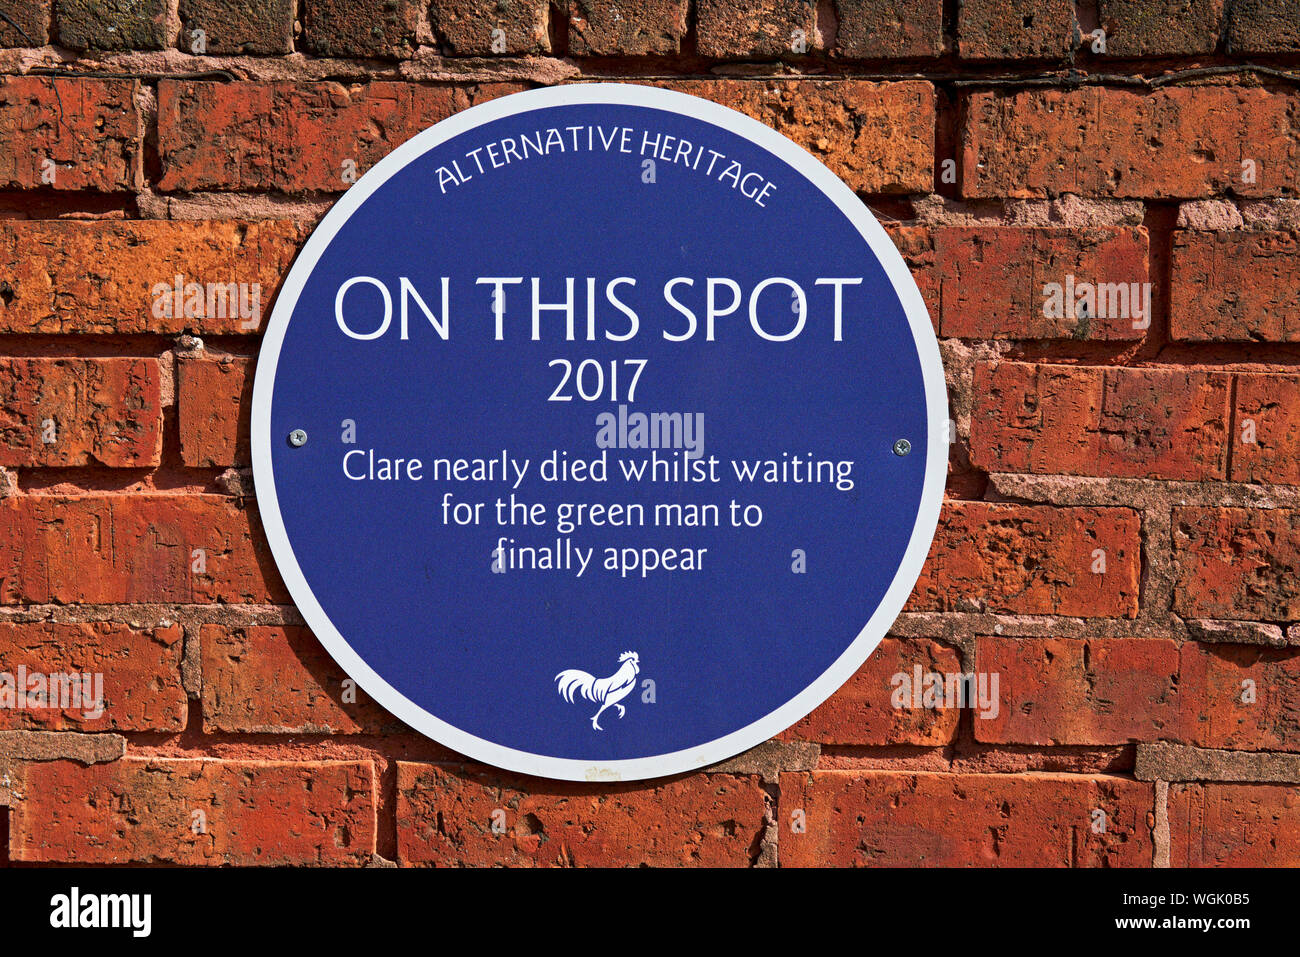 Alternative Heritage plaque: on this spot, in 2017, Clare nearly died whilst waiting for the green man to finally appear... Hull, East Yorkshire Stock Photo